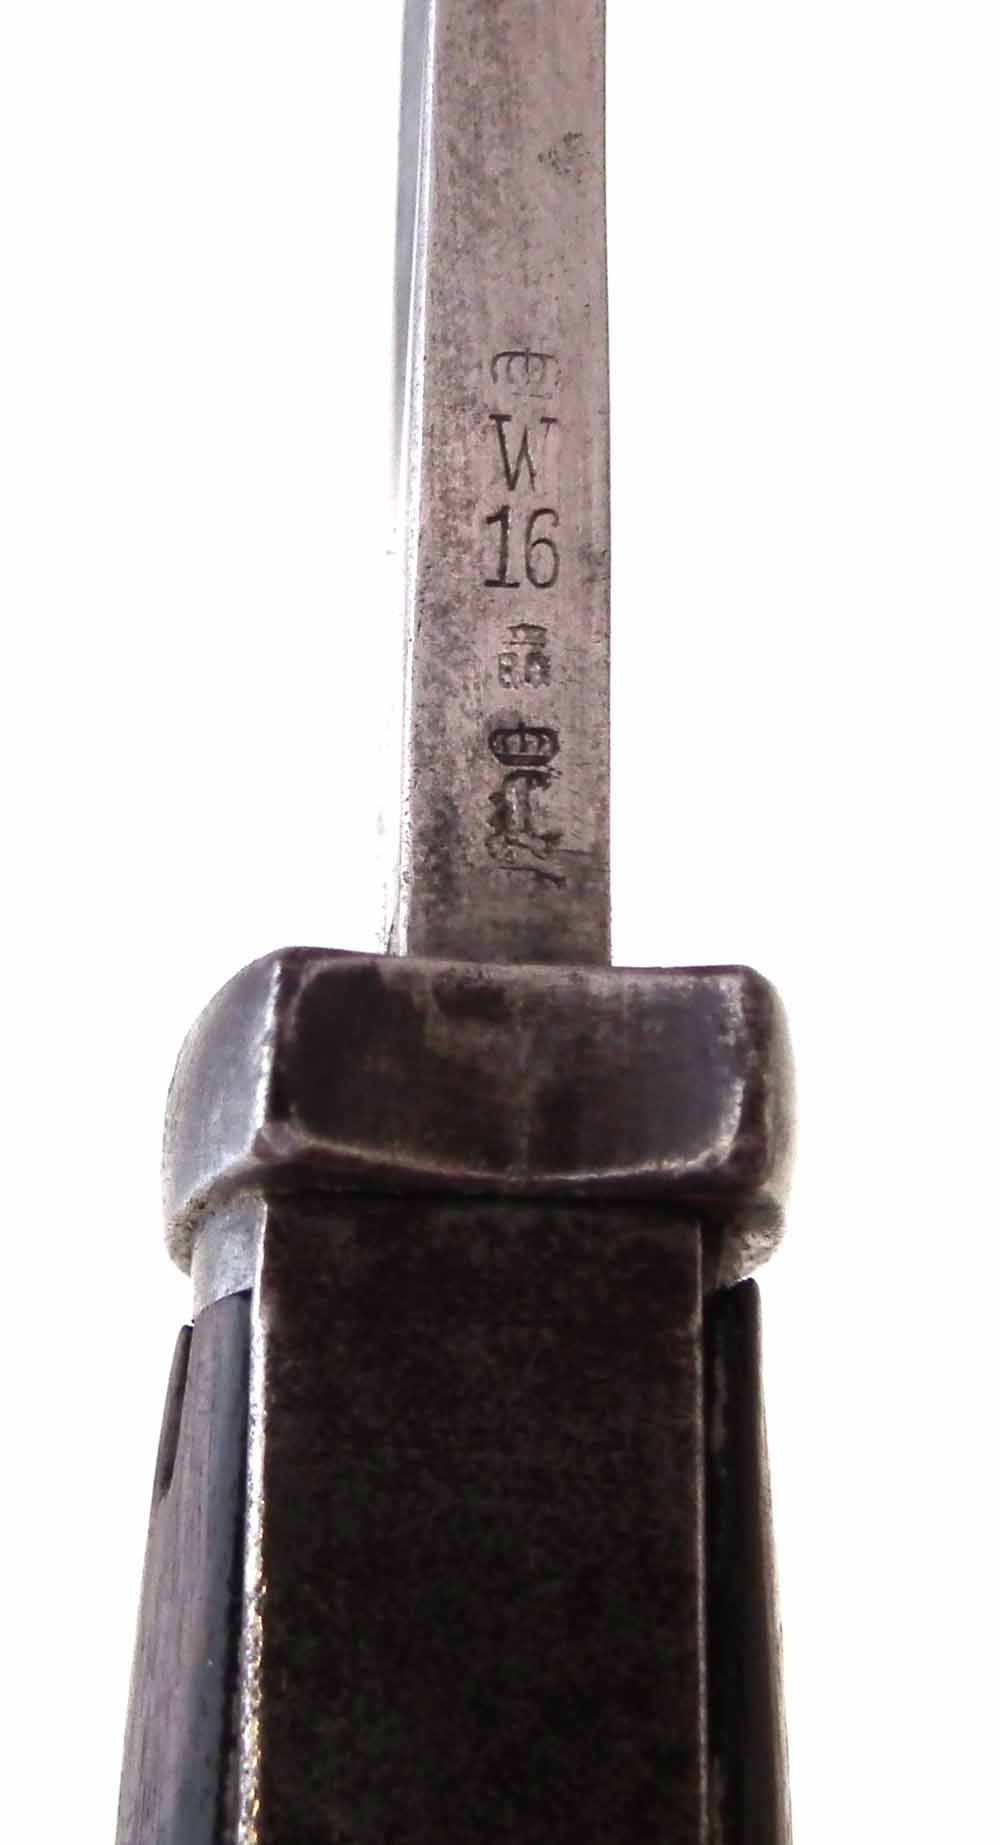 WW1 Mauser 1898 rifle bayonet by Simson & Co. with scabbard and leather frog, also a K98 rifle - Image 7 of 14